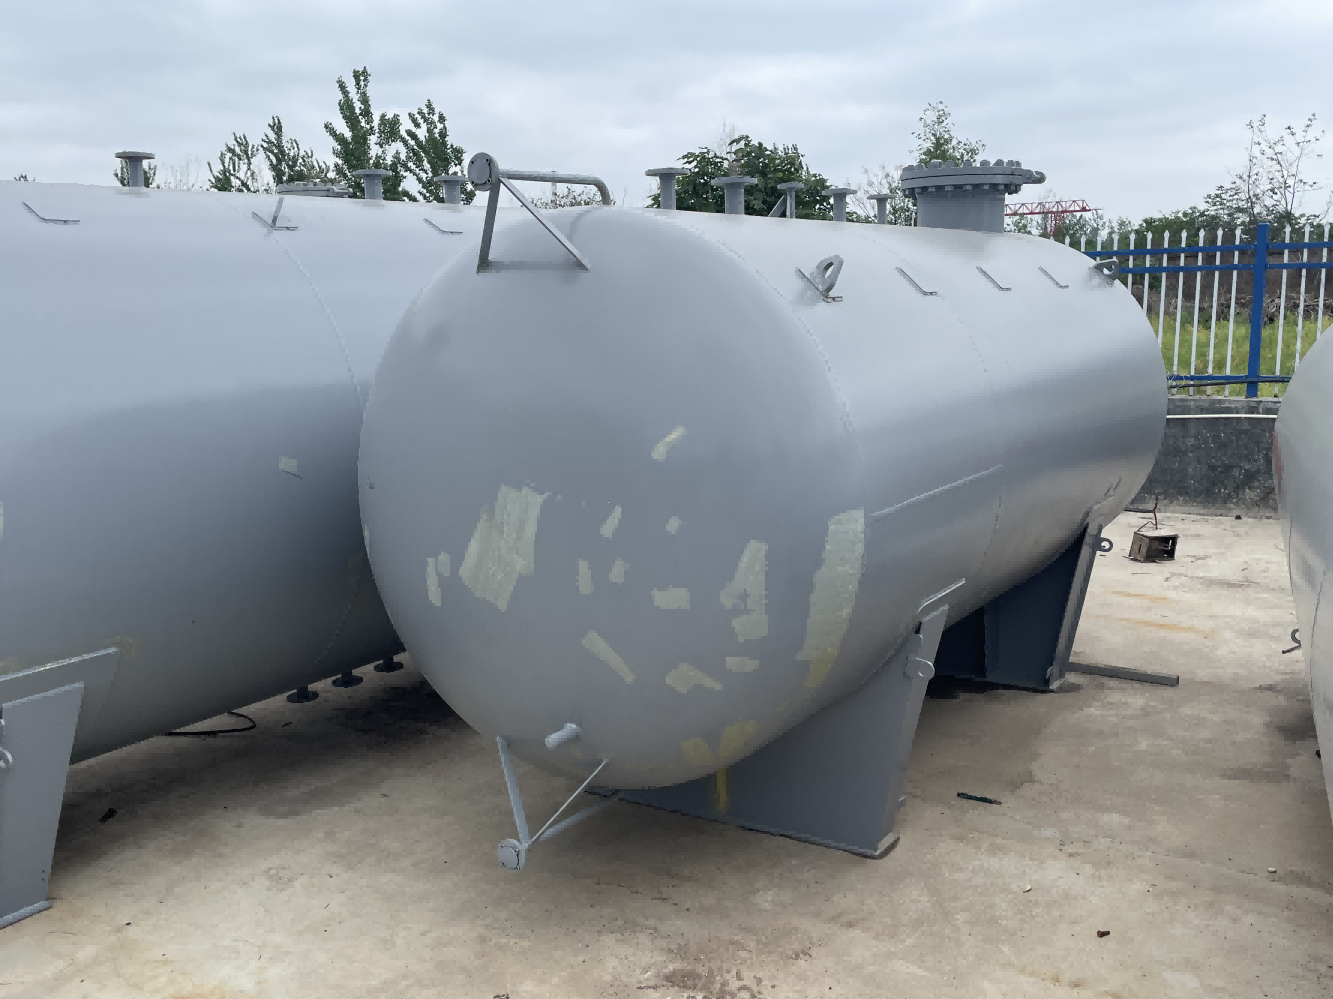 Some details about LPG storage tank